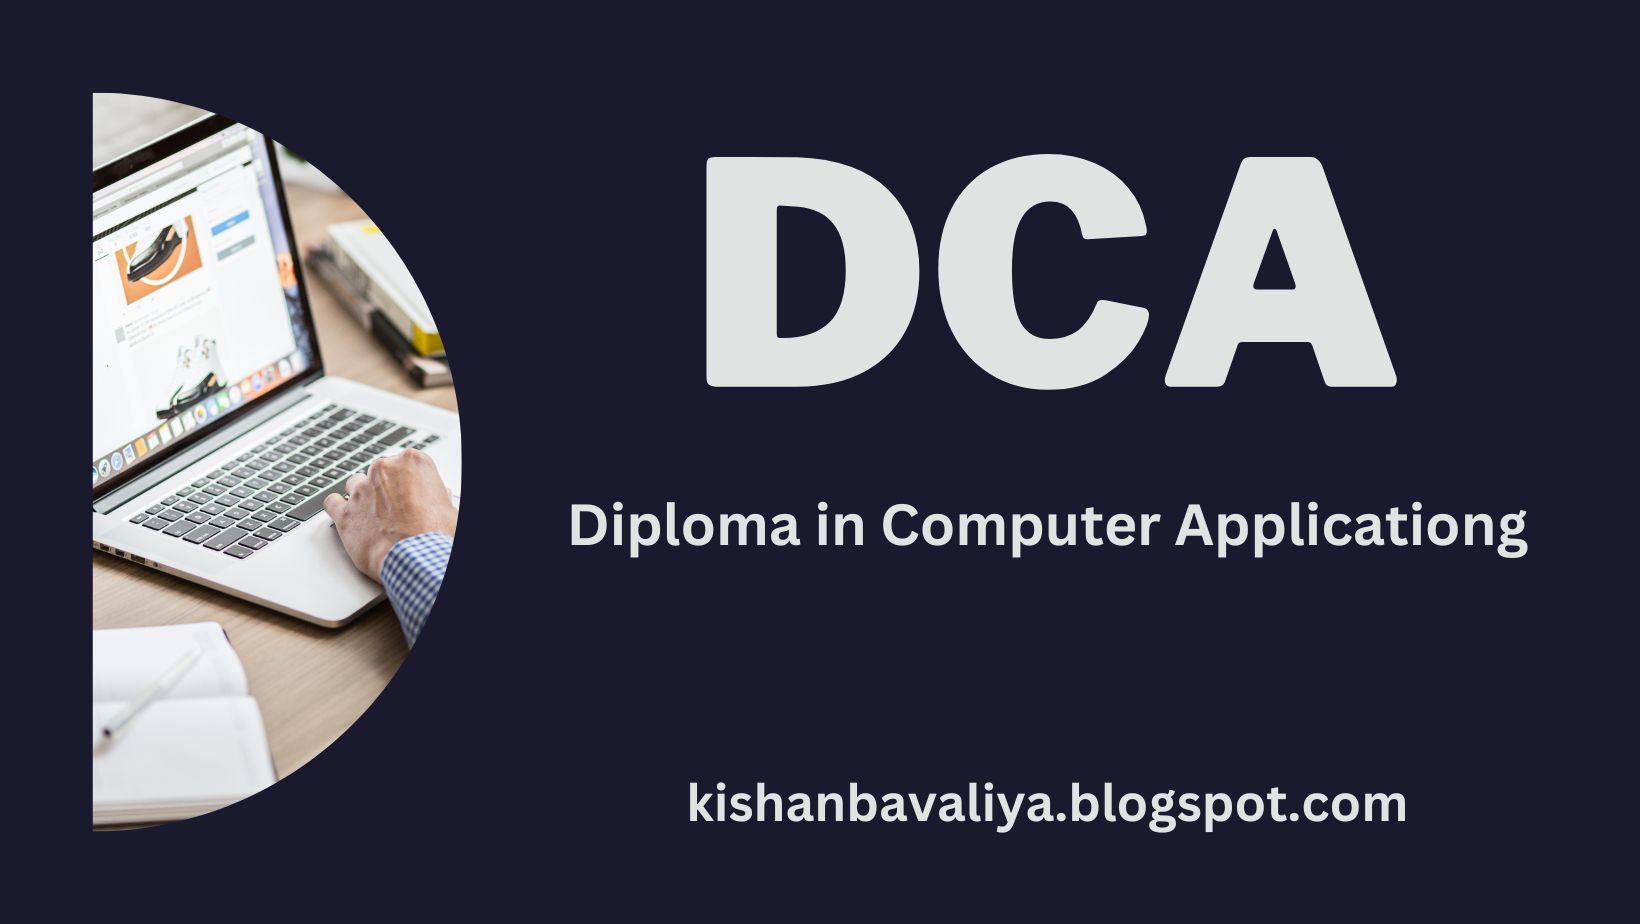 DCA - Diploma in Computer Applications